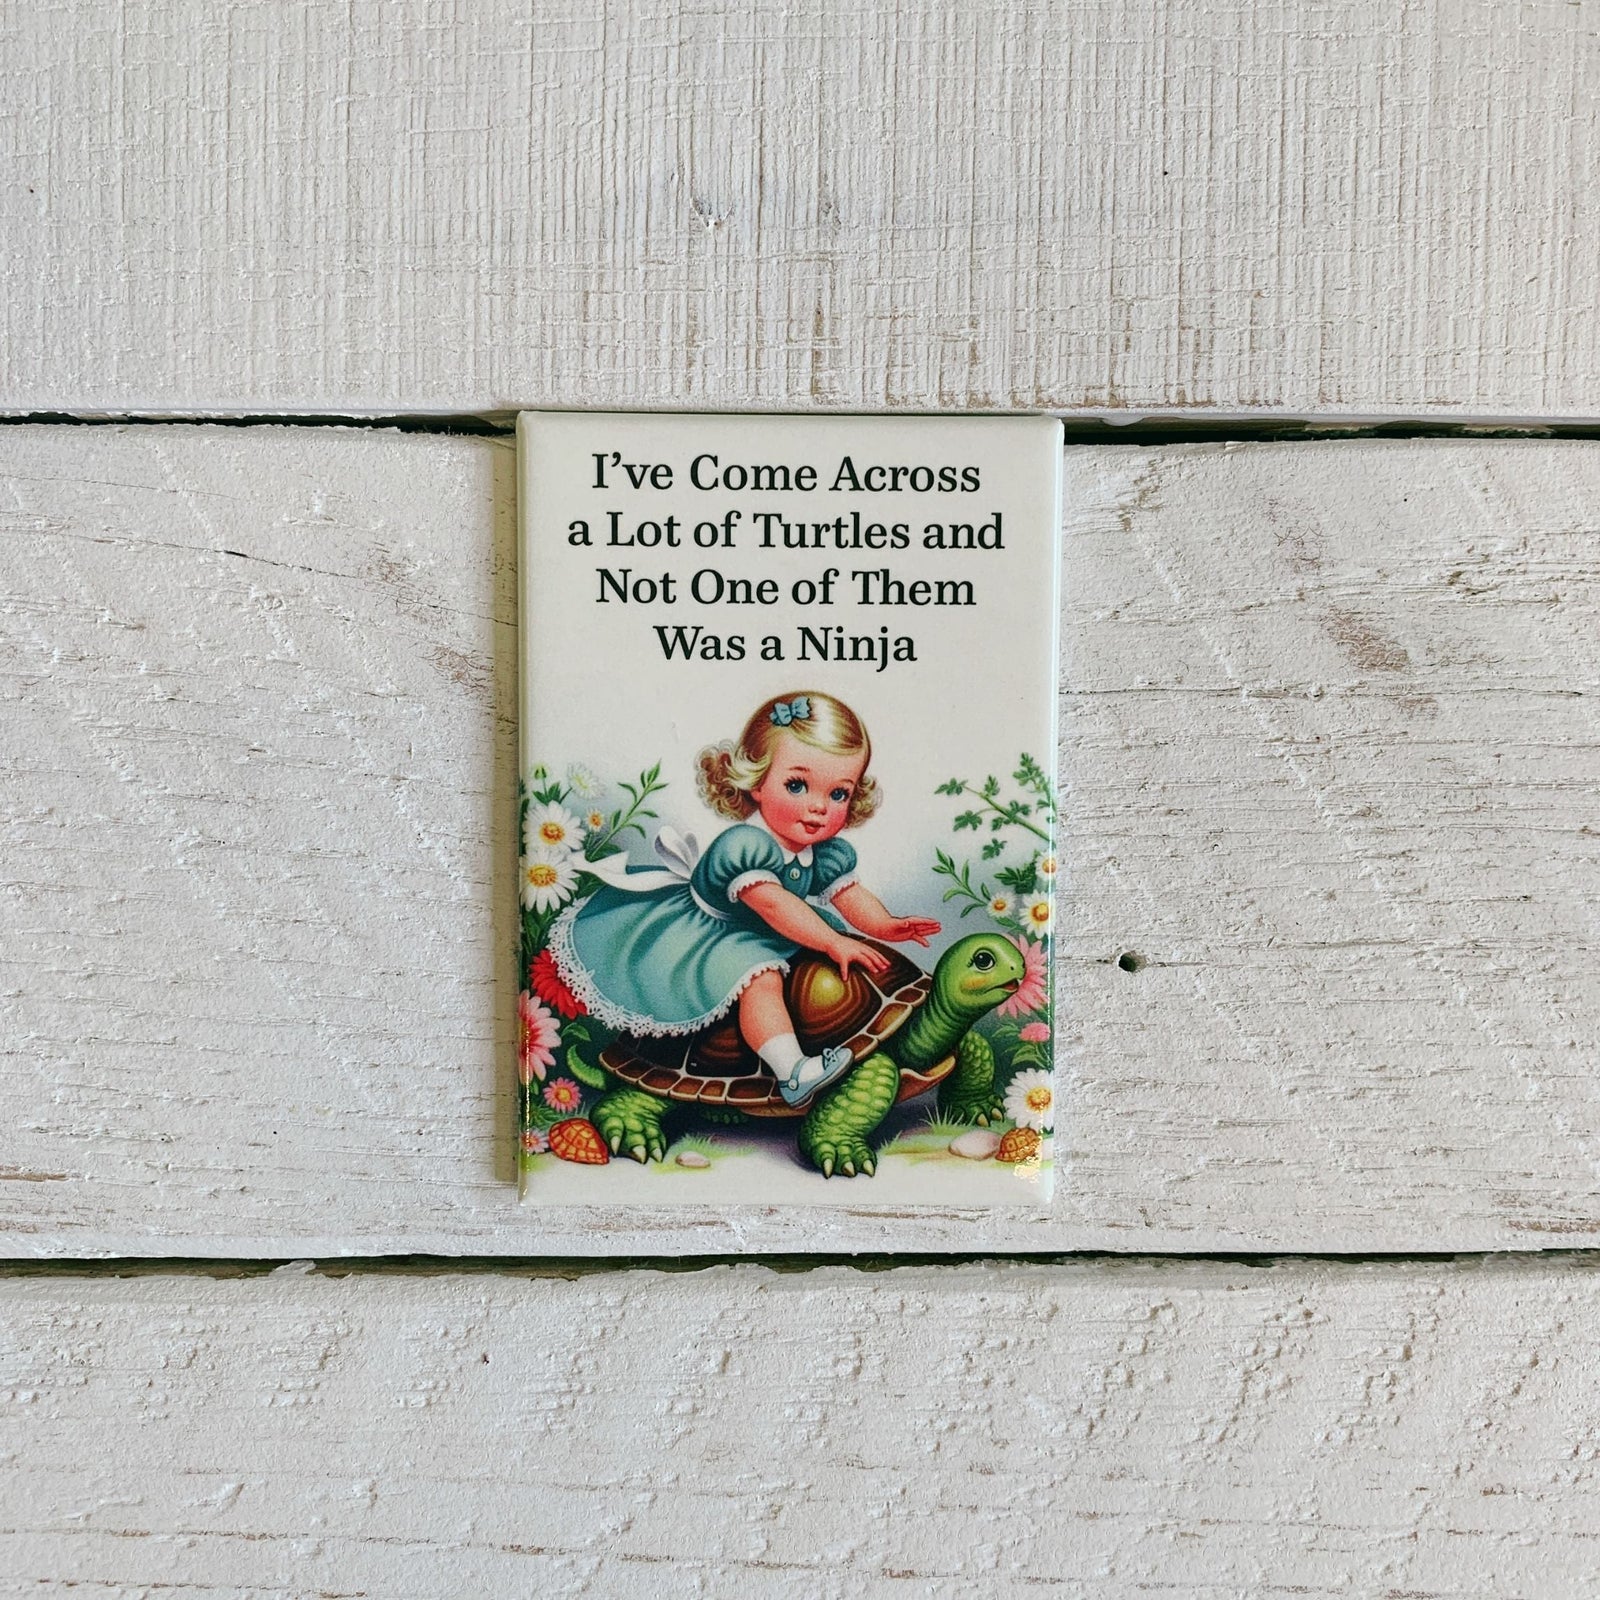 I've Come Across a Lot Of Turtles and Not One of Them Was a Ninja Rectangular Magnet | Fridge Magnetic Surface Magnet Decor | 3" x 2"